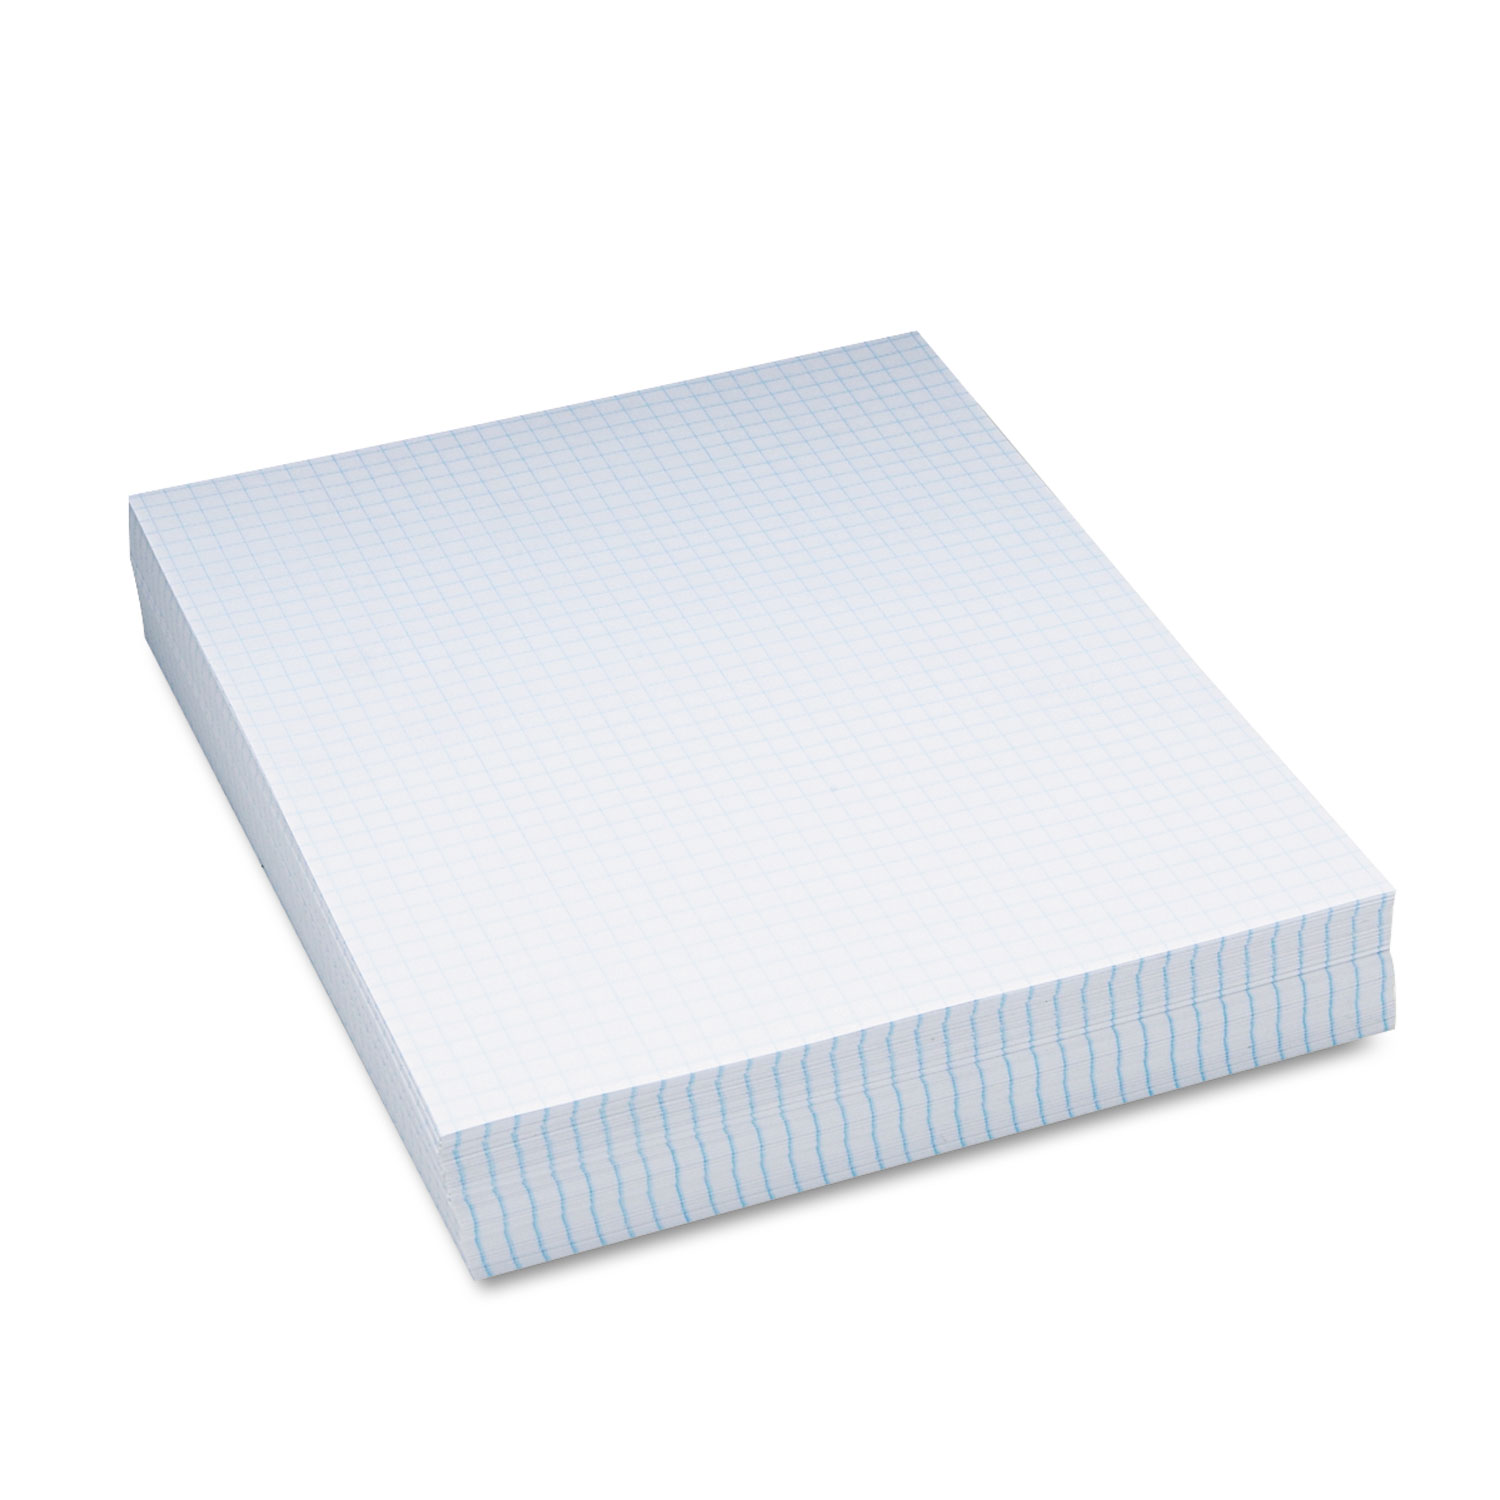 Pacon PAC2411 Composition Paper, 1/4" Quadrille, 16 lbs., 8-1/2 x 11, White, 500 Sheets/Pack